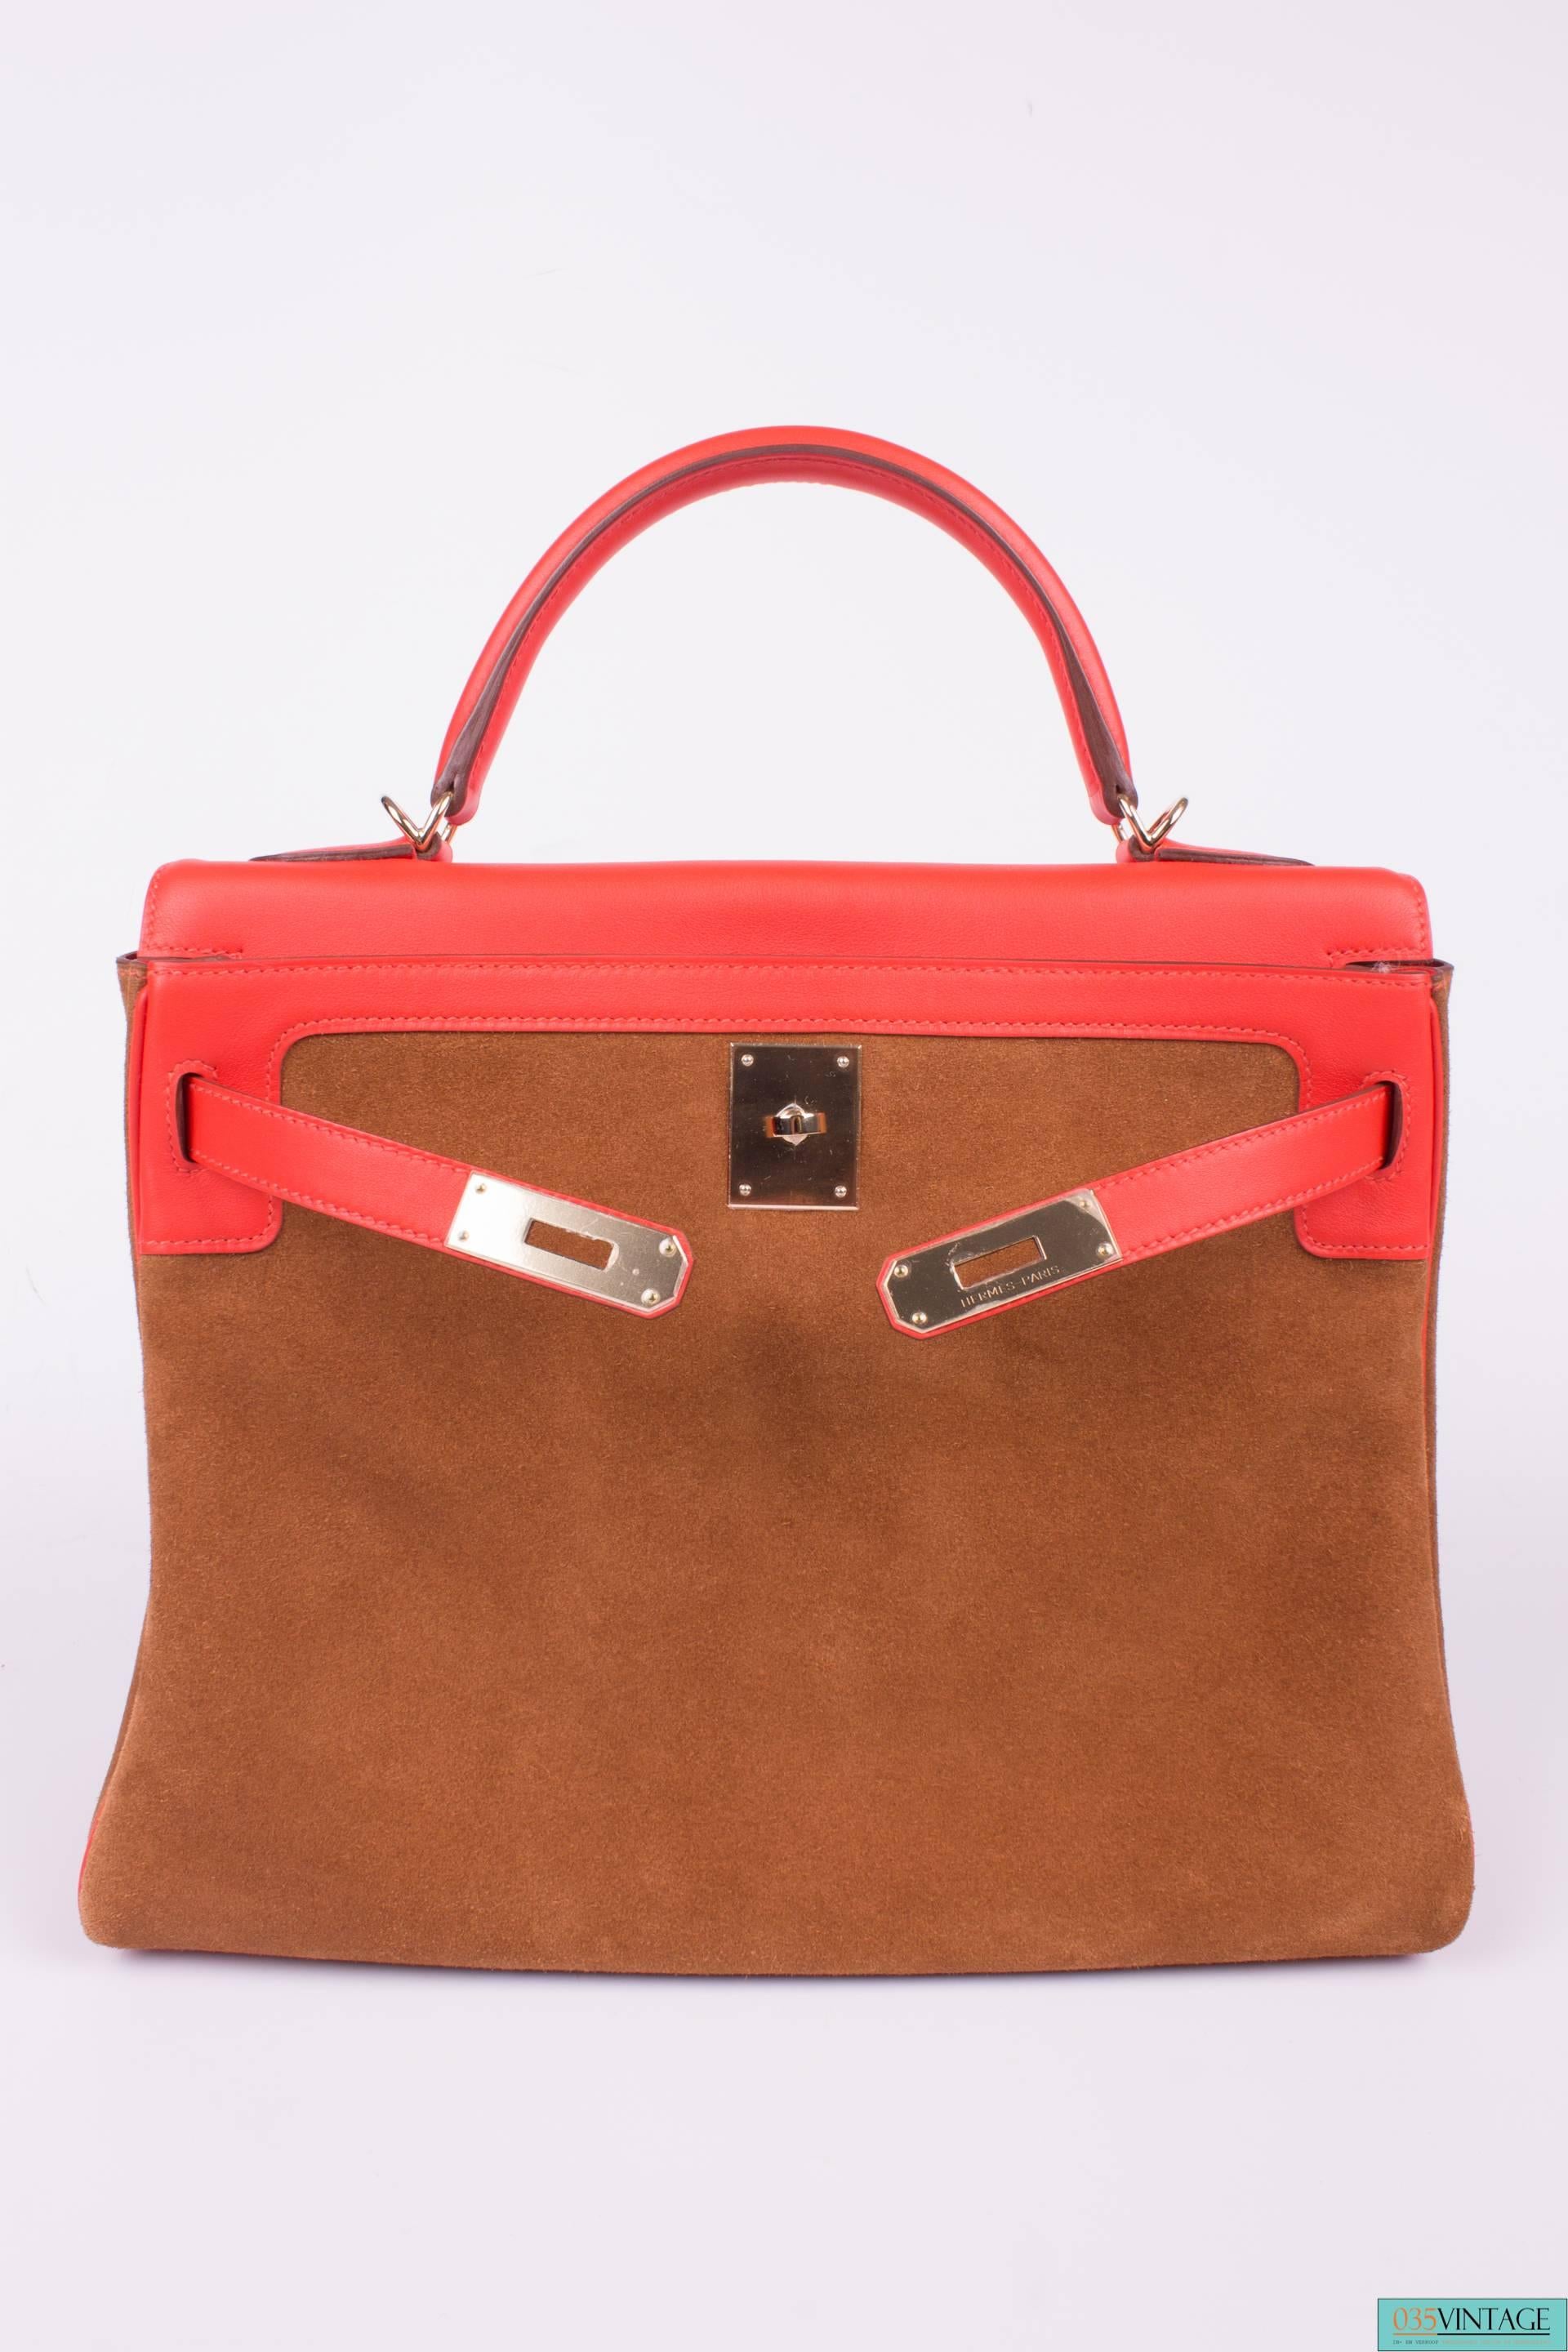 Hermes Kelly 32 Grizzly Bag Very Limited Edition - brown/orange  1